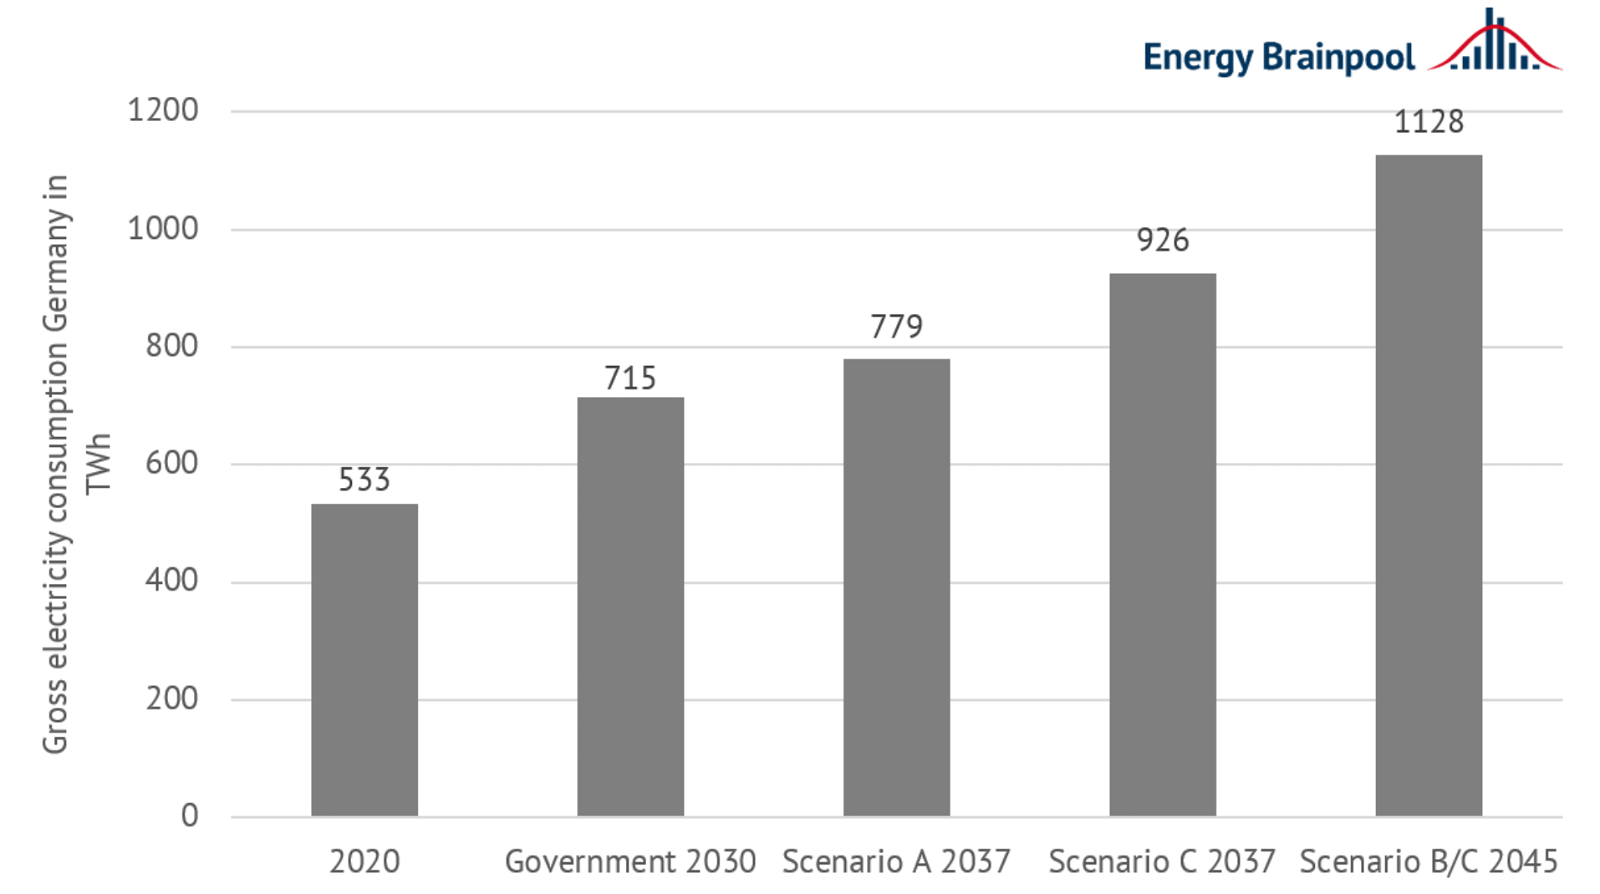 Figure 2: development of gross electricity consumption in Germany in TWh by scenario (source: Energy Brainpool)